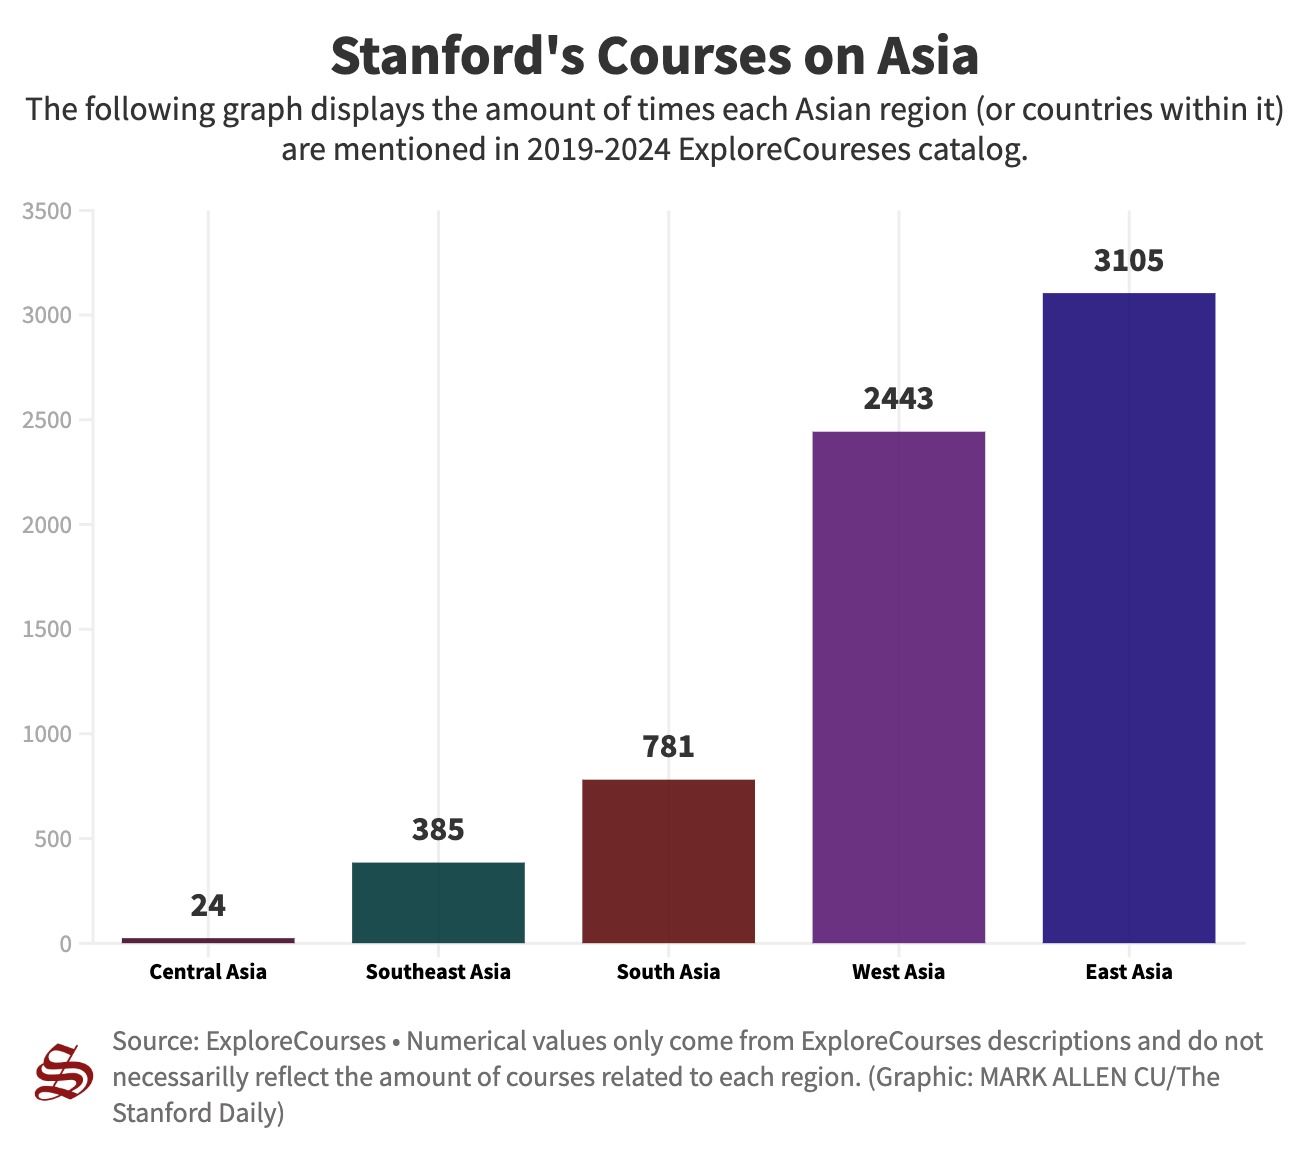 Cu | Stanford, where’s the rest of Asia?